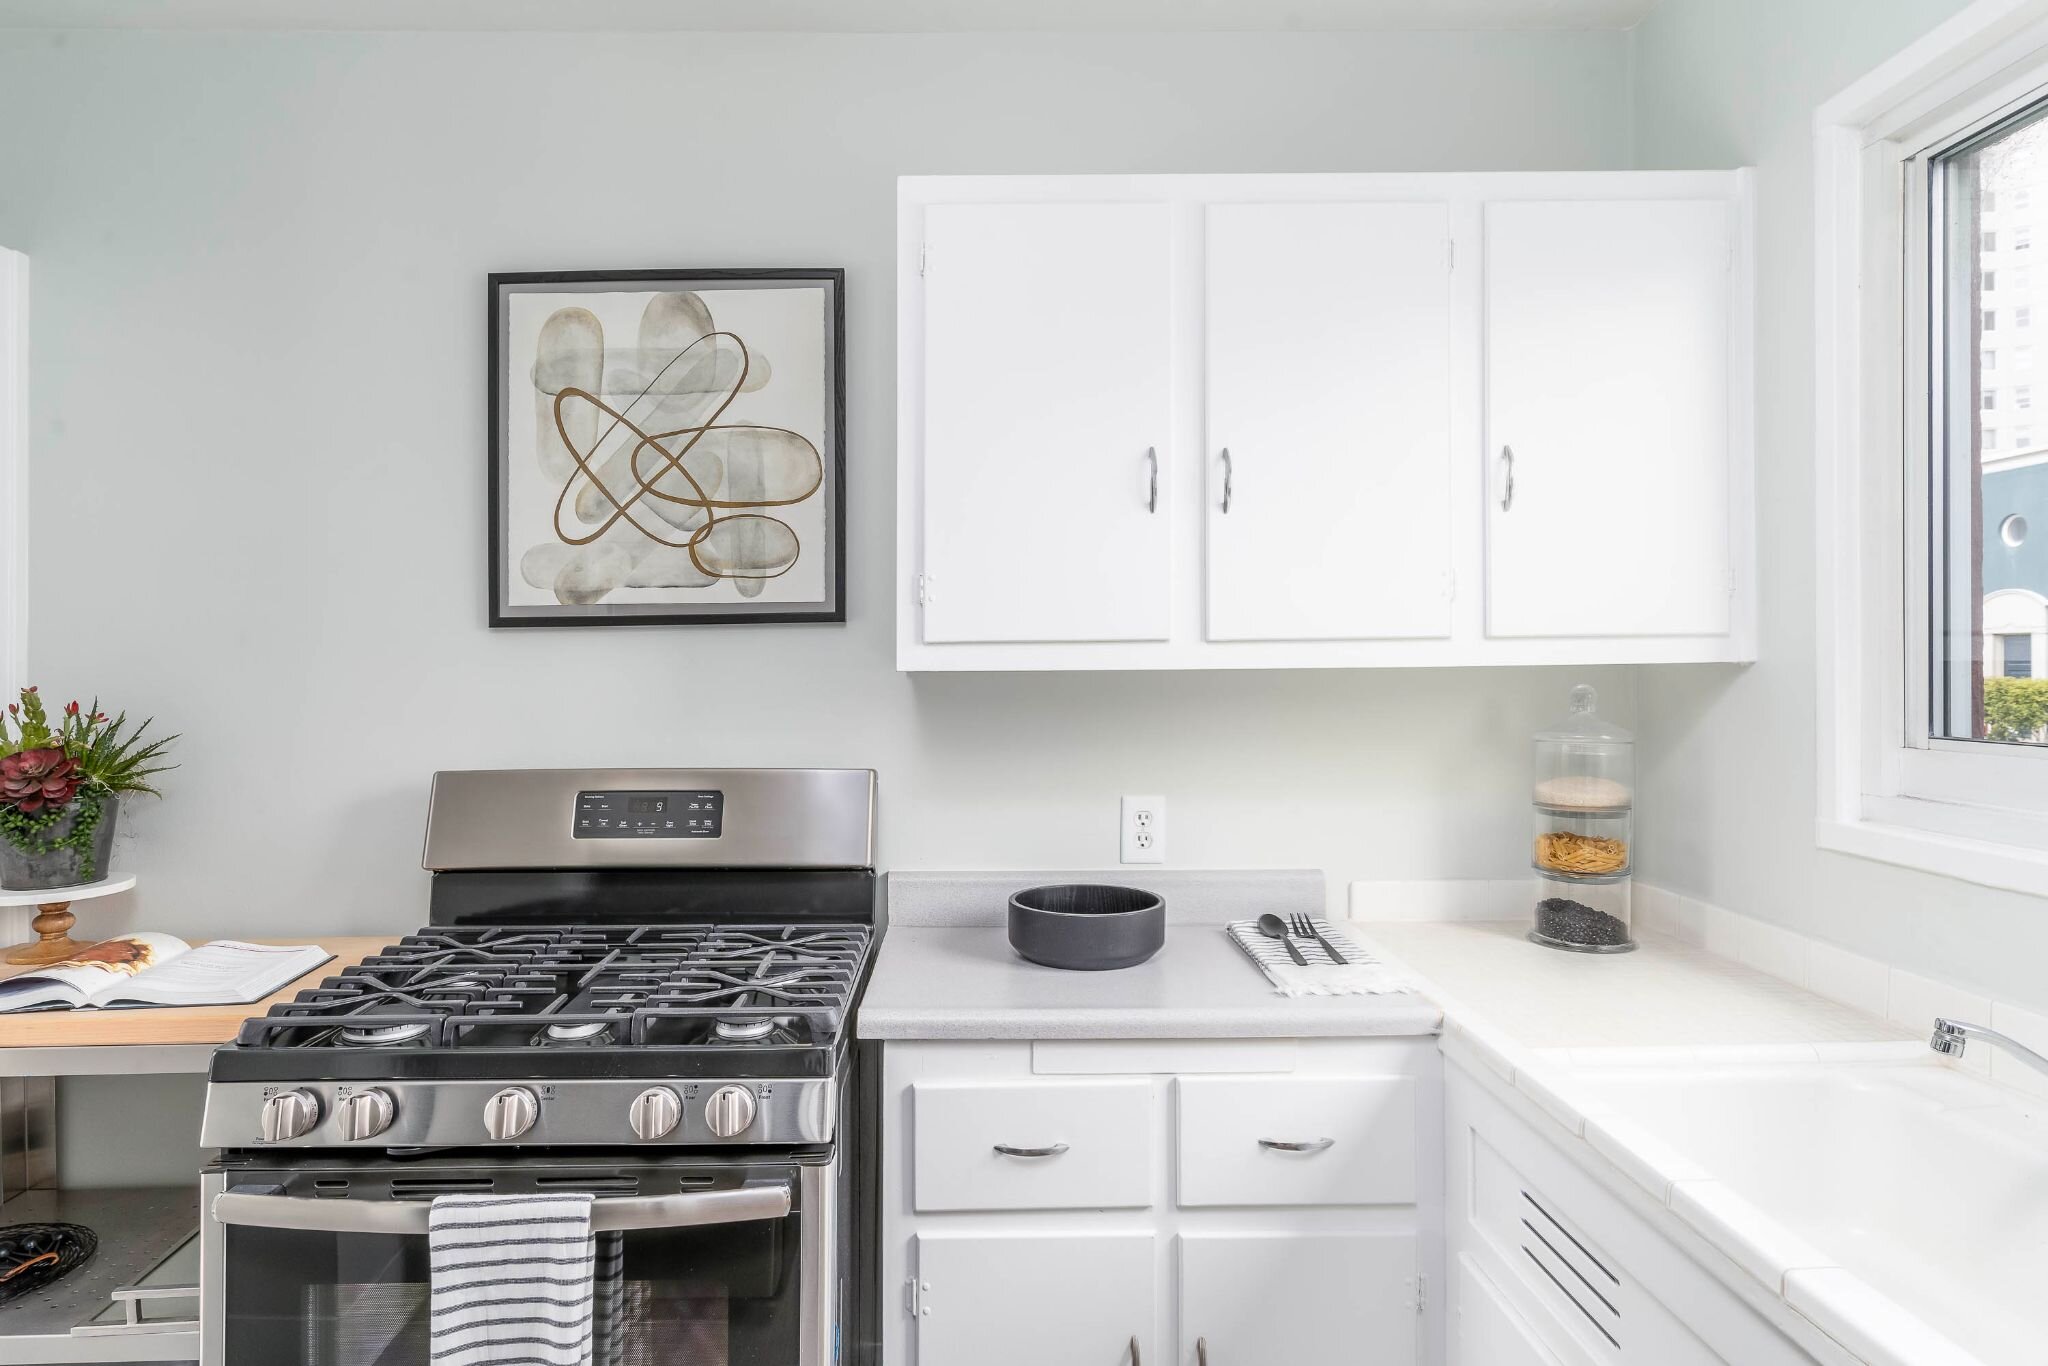 Convenience is having stainless steel appliances that make every cooking adventure that much easier to clean up after. #Parkmerced